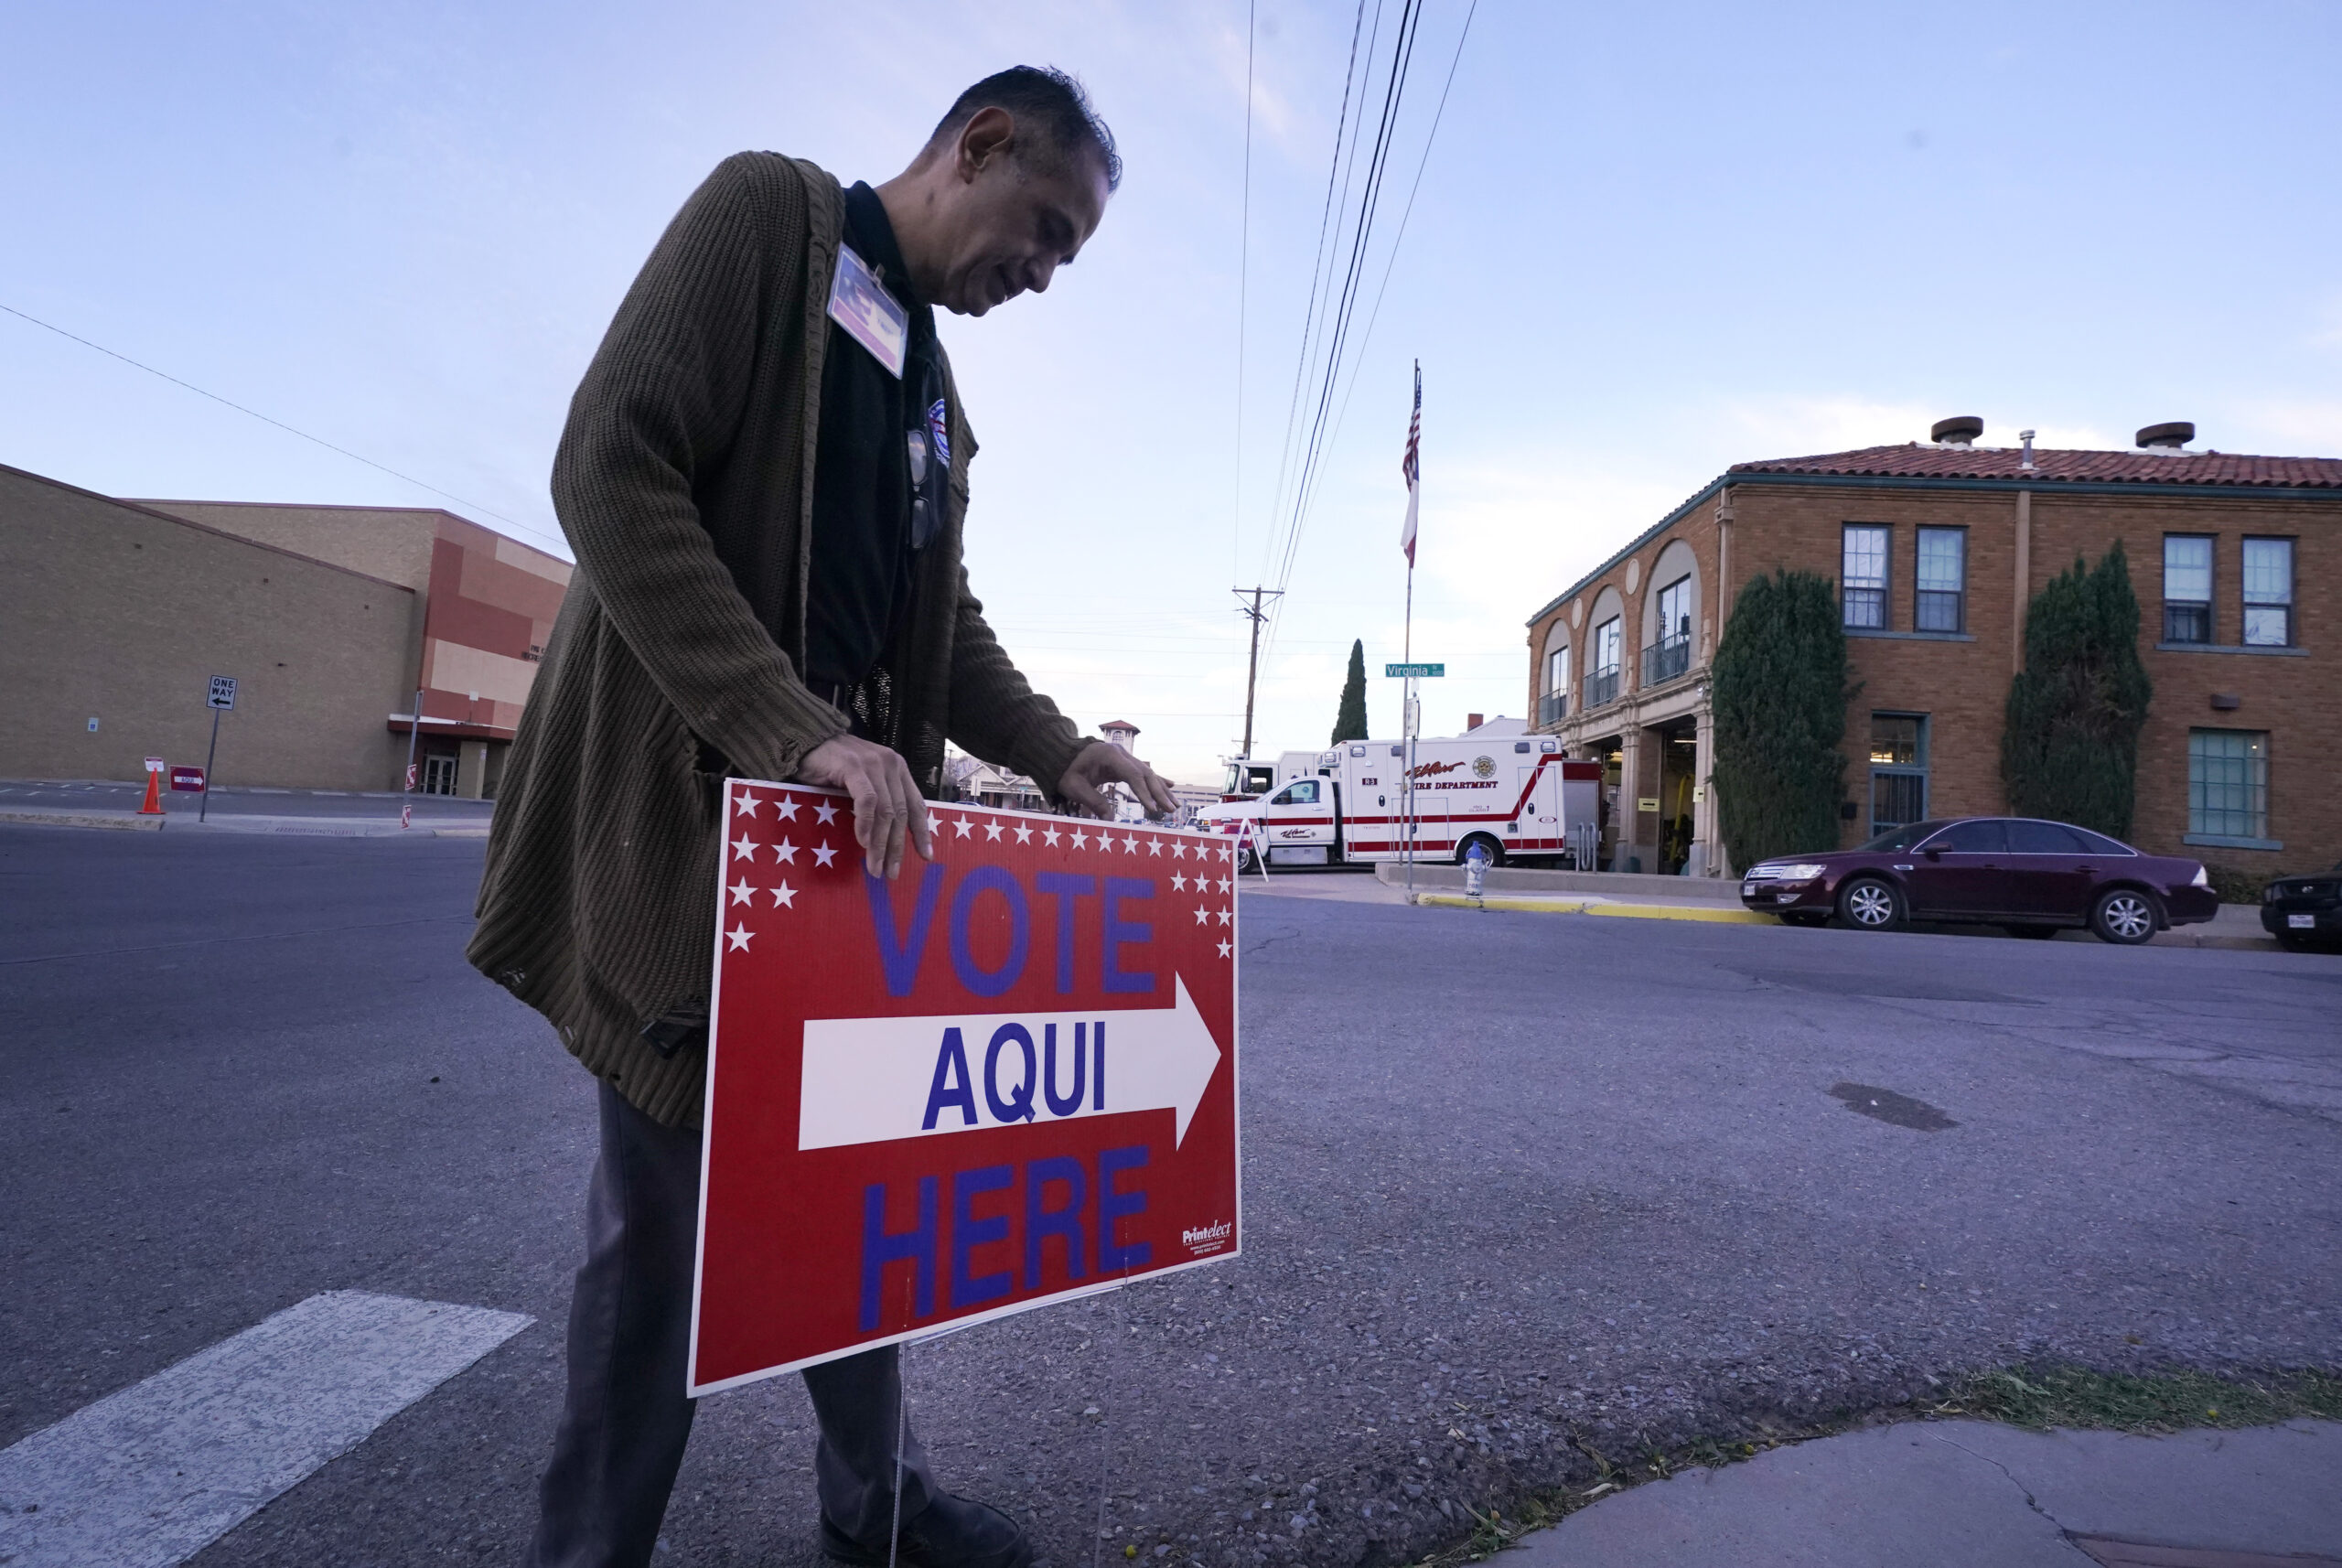 An election worker places a sign that says "Vote here/aqui" outside a polling station at a fire station in El Paso, Texas.